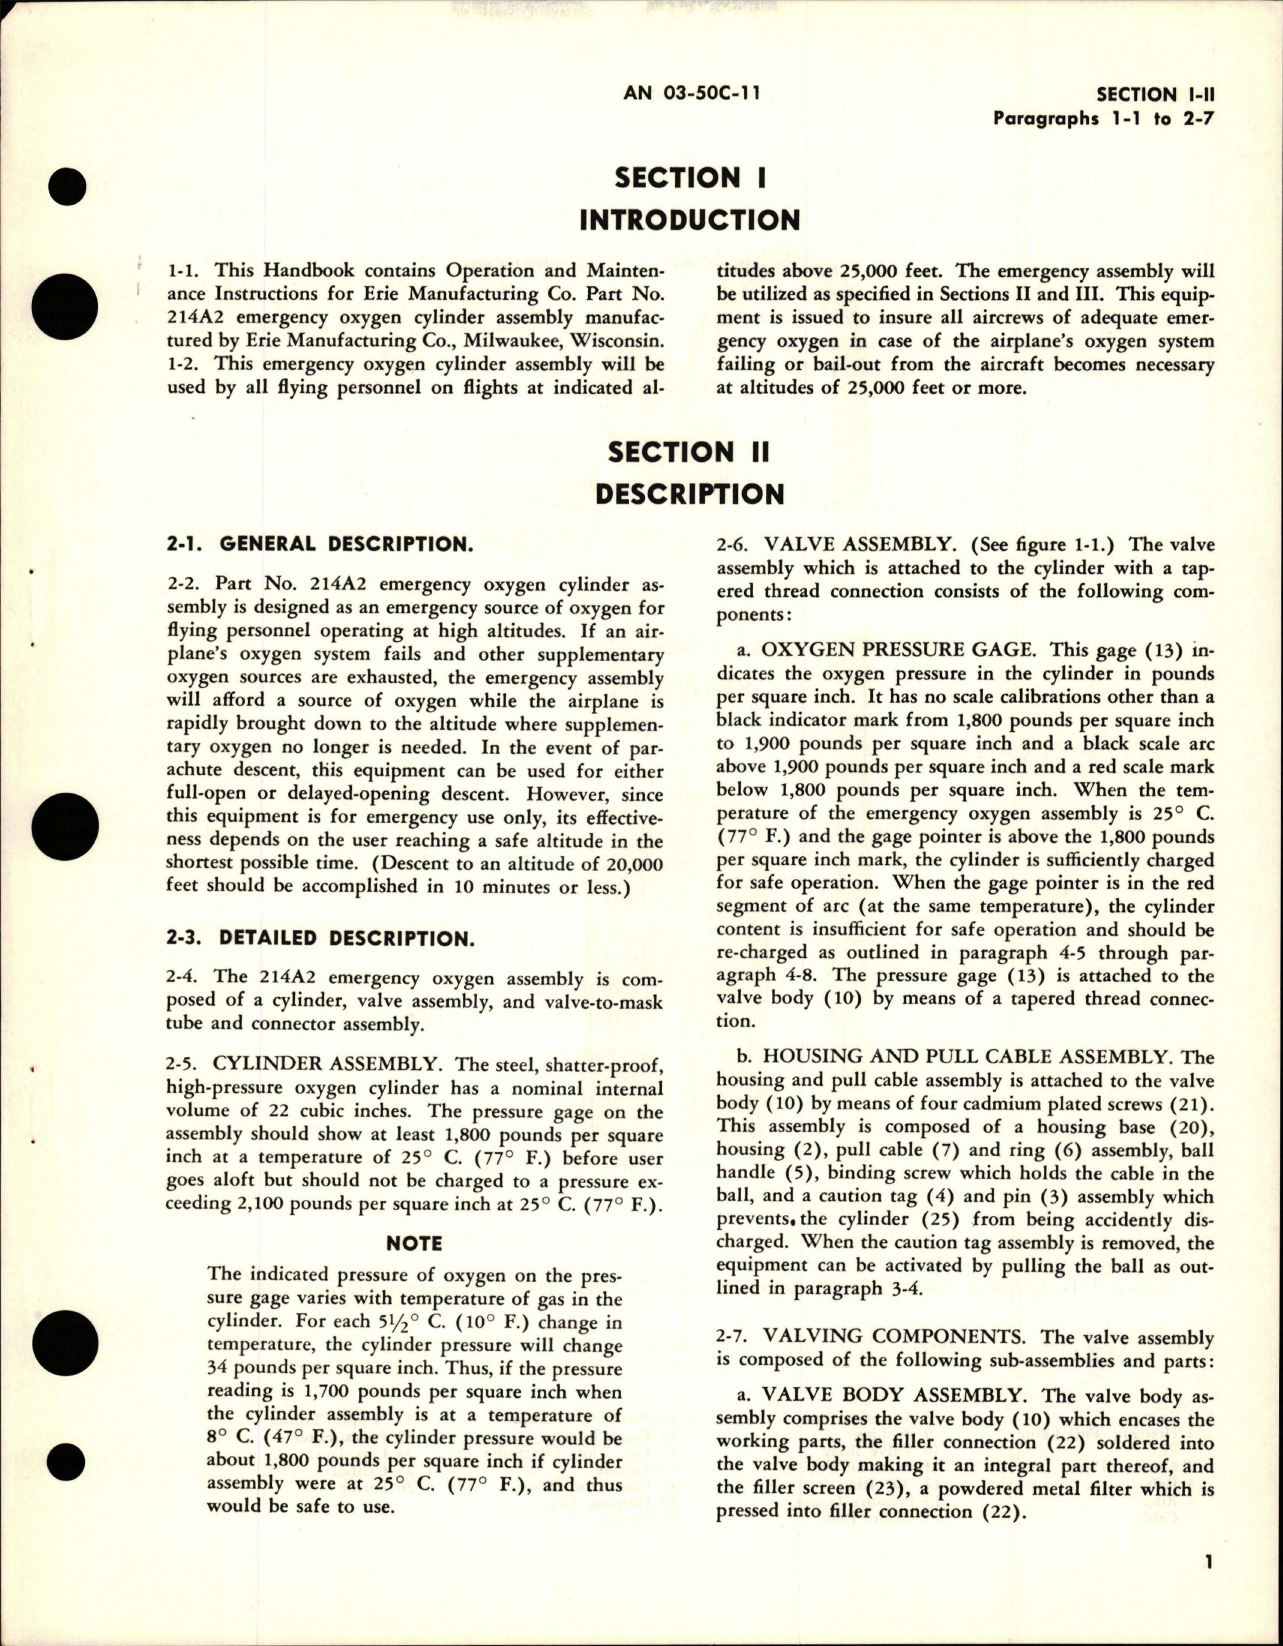 Sample page 5 from AirCorps Library document: Operation, Service, and Overhaul Instructions for Emergency Oxygen Cylinder Assembly - Part 214A2 